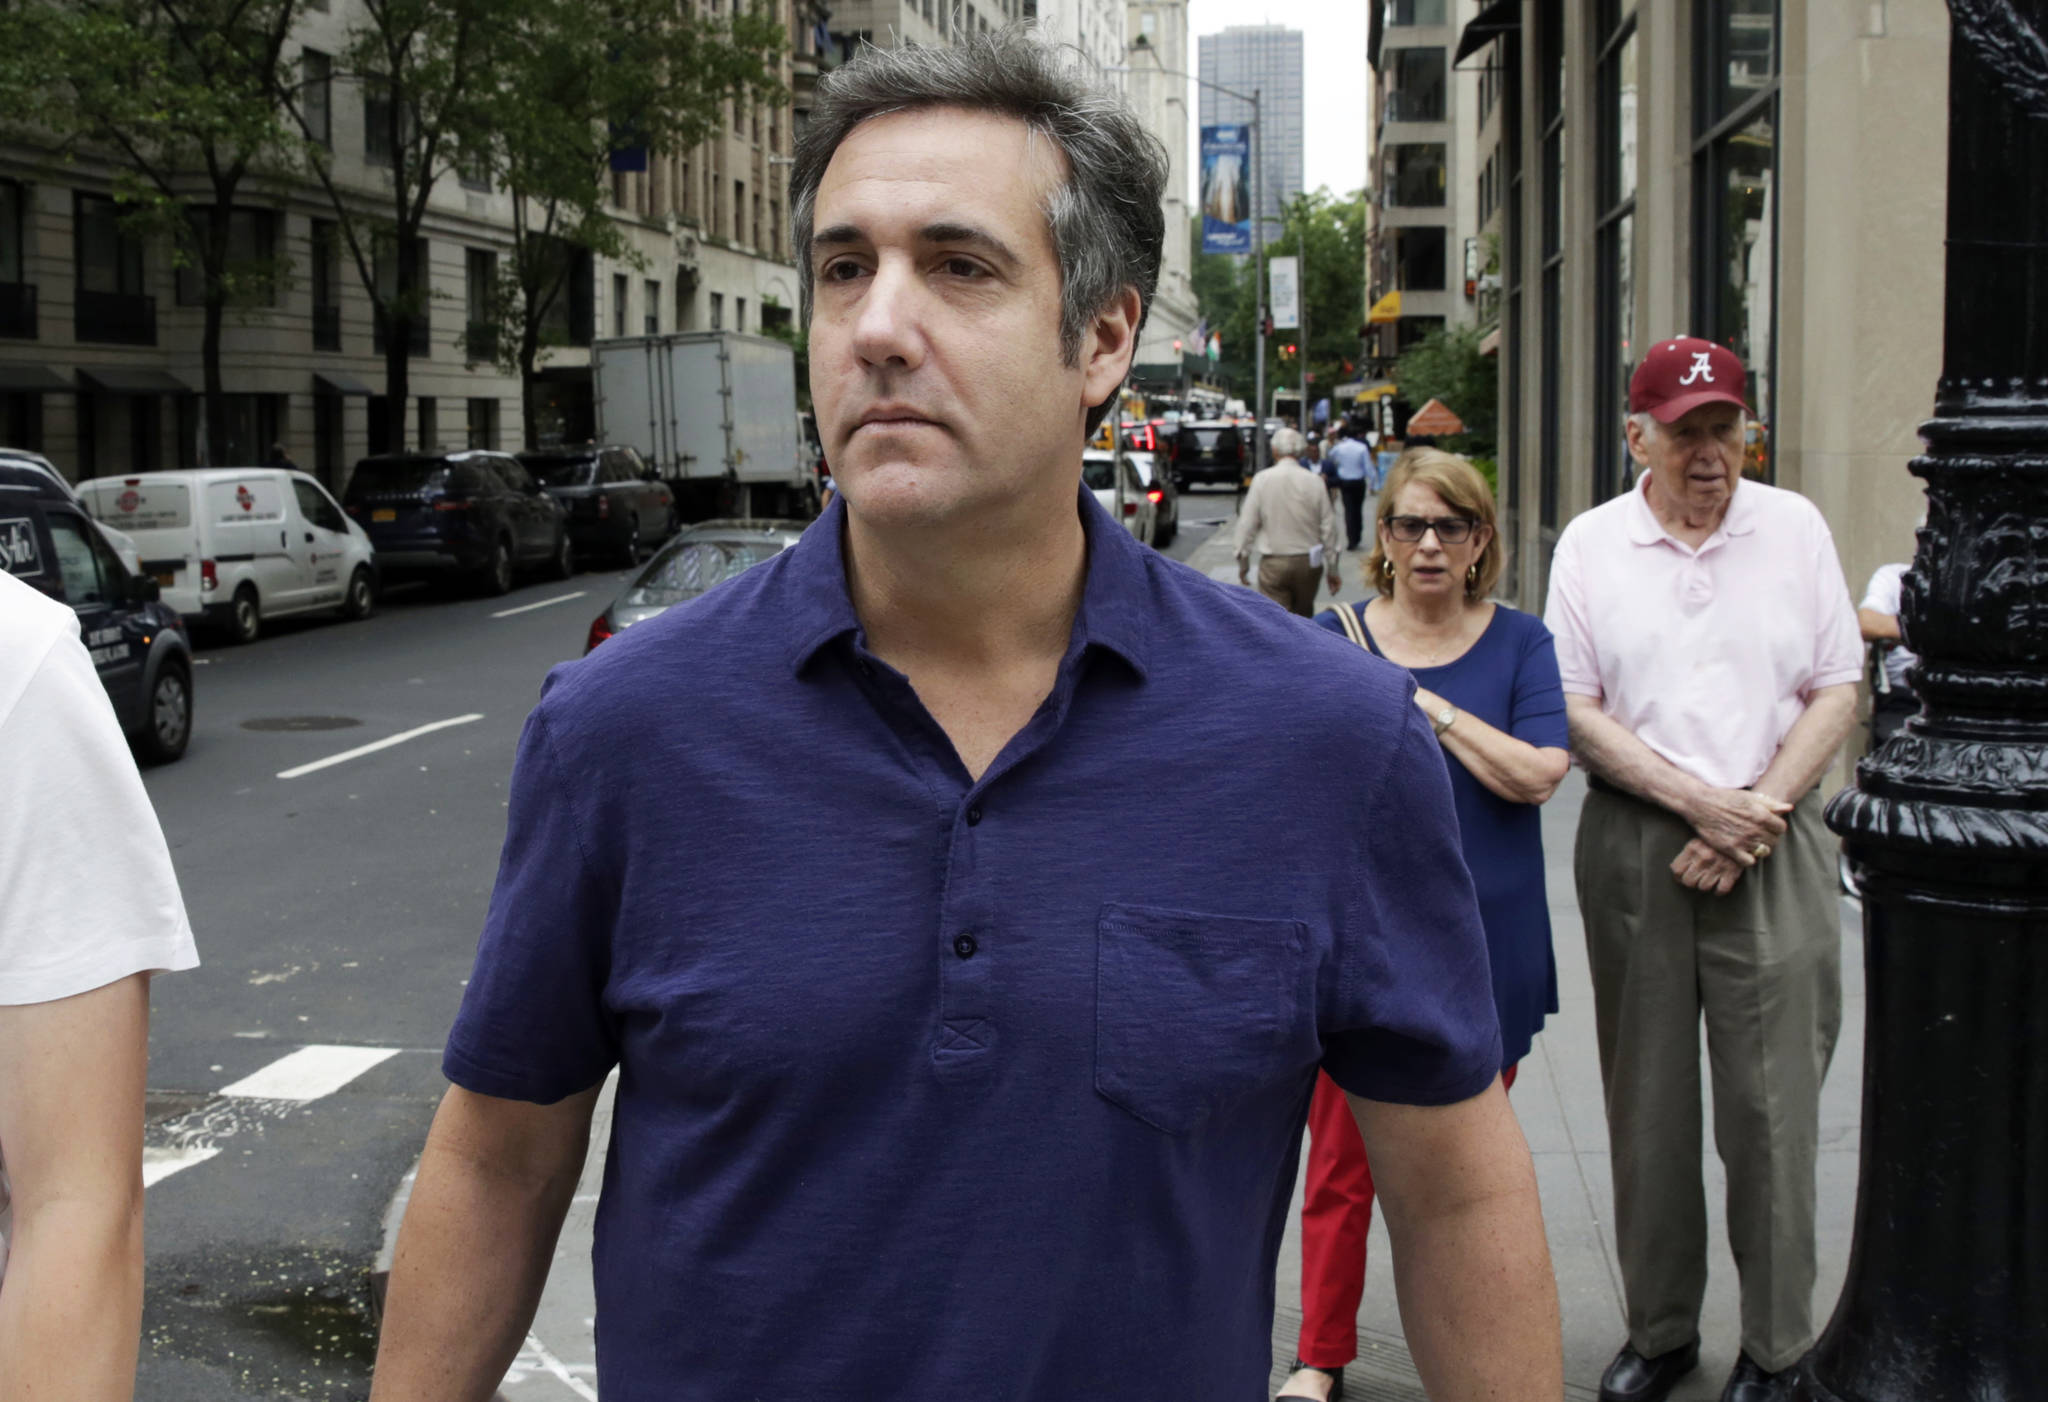 In this July 30, 2018 file photo, Michael Cohen, formerly a lawyer for President Trump, leaves his hotel, in New York. (AP Photo/Richard Drew, File)